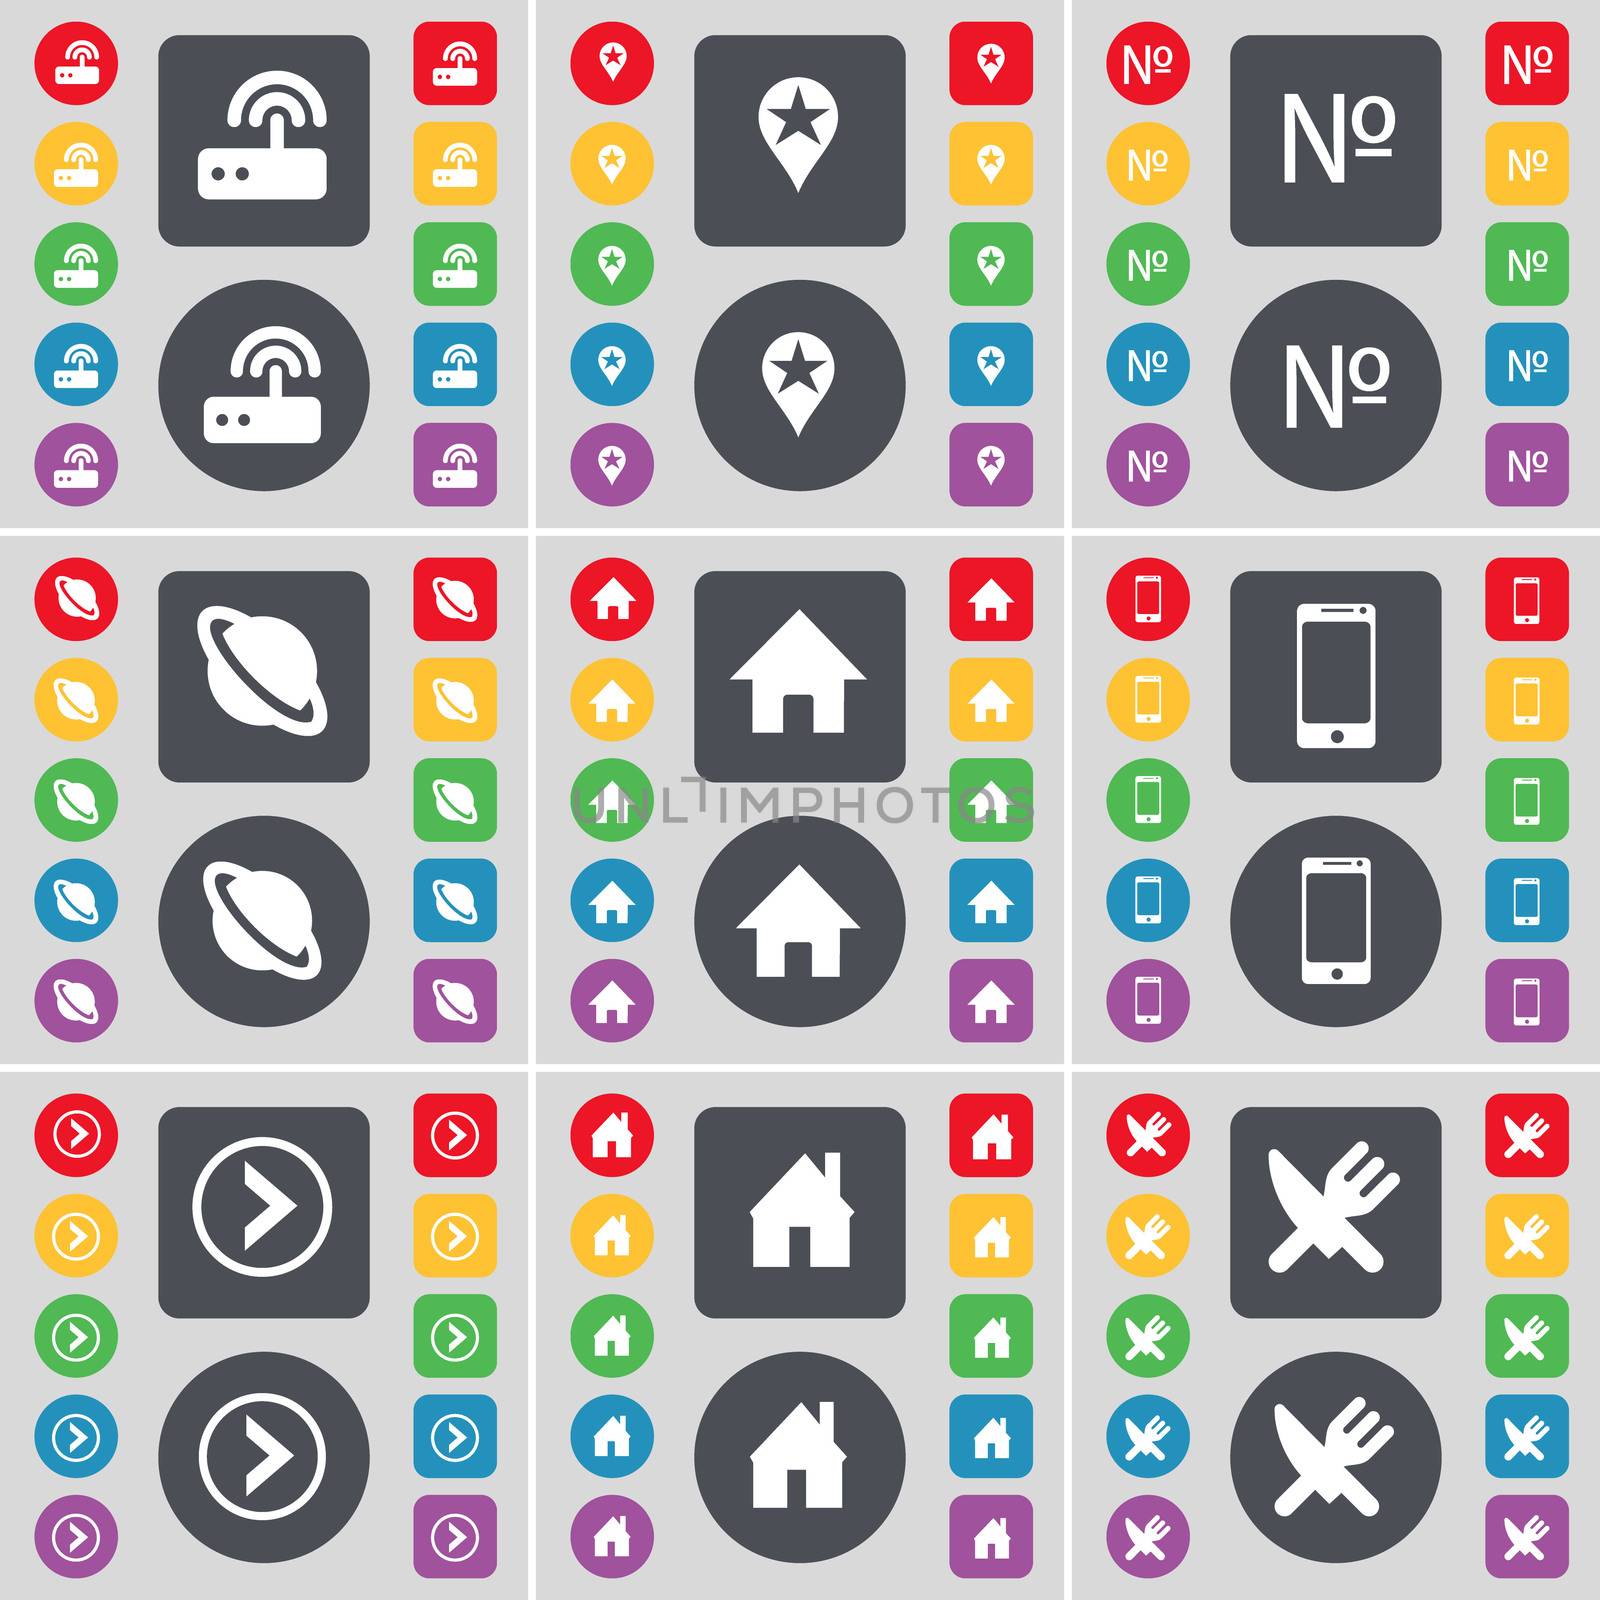 Router, Checkpoint, Number, Planet, House, Smartphone, Arrow right, House, Fork and knife icon symbol. A large set of flat, colored buttons for your design. illustration